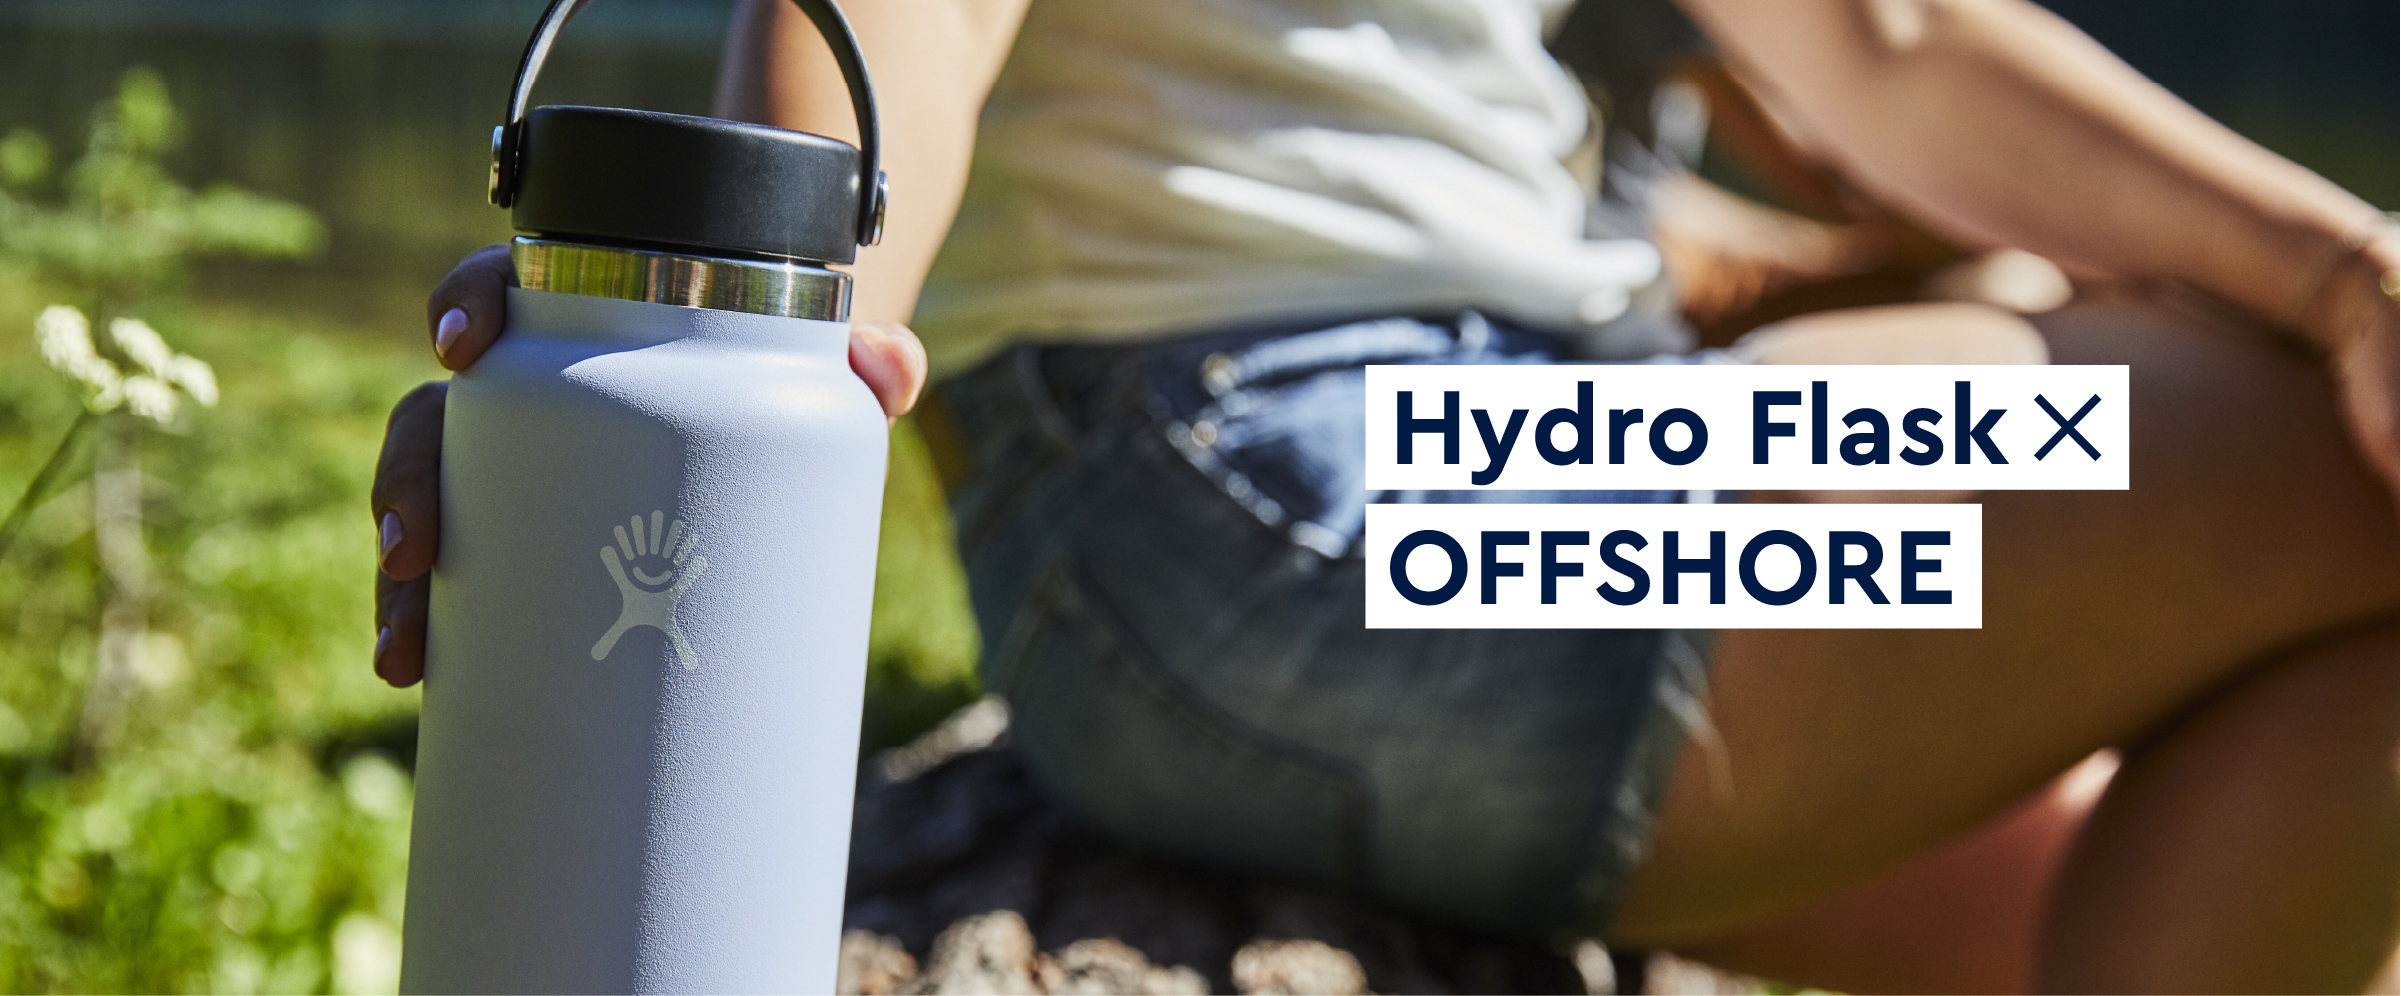 Hydro Flask × OFFSHORE